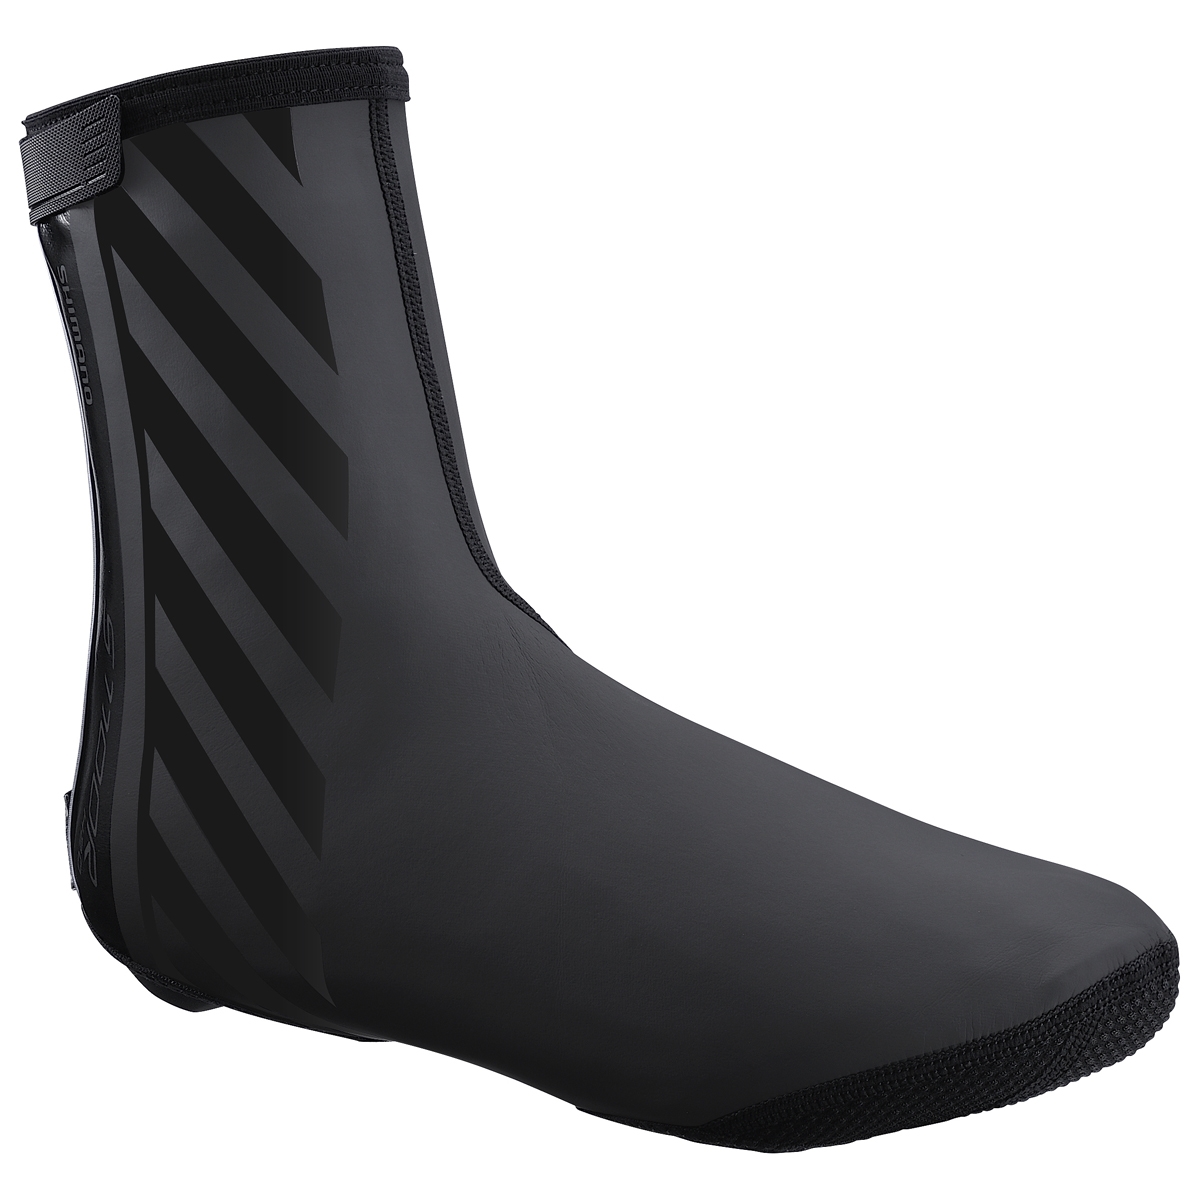 Shoe covers road S1100R H2O black size XL (44-47)